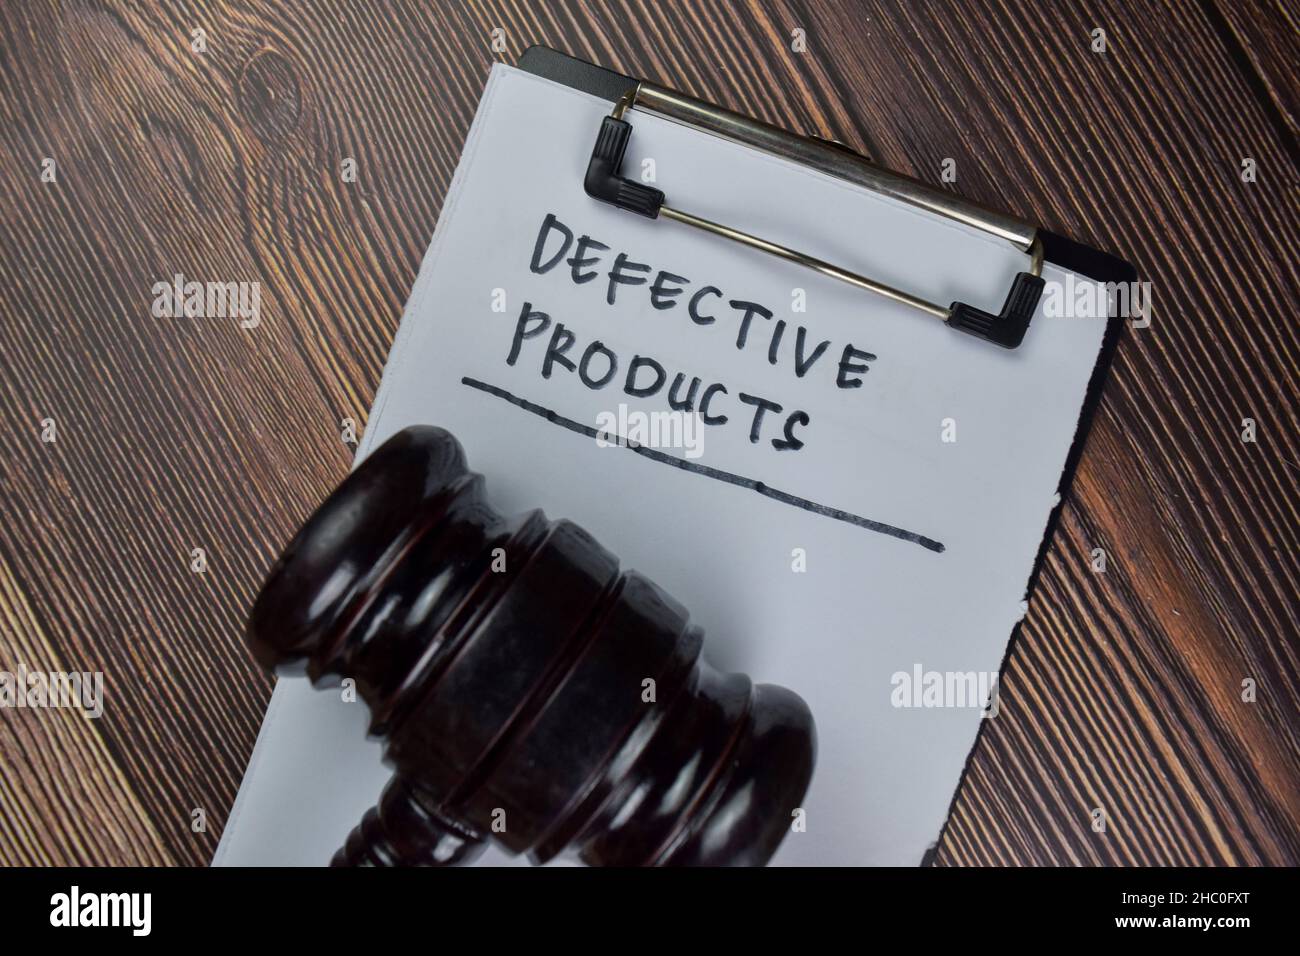 Defective Products write on a paperwork isolated on Wooden Table. Stock Photo